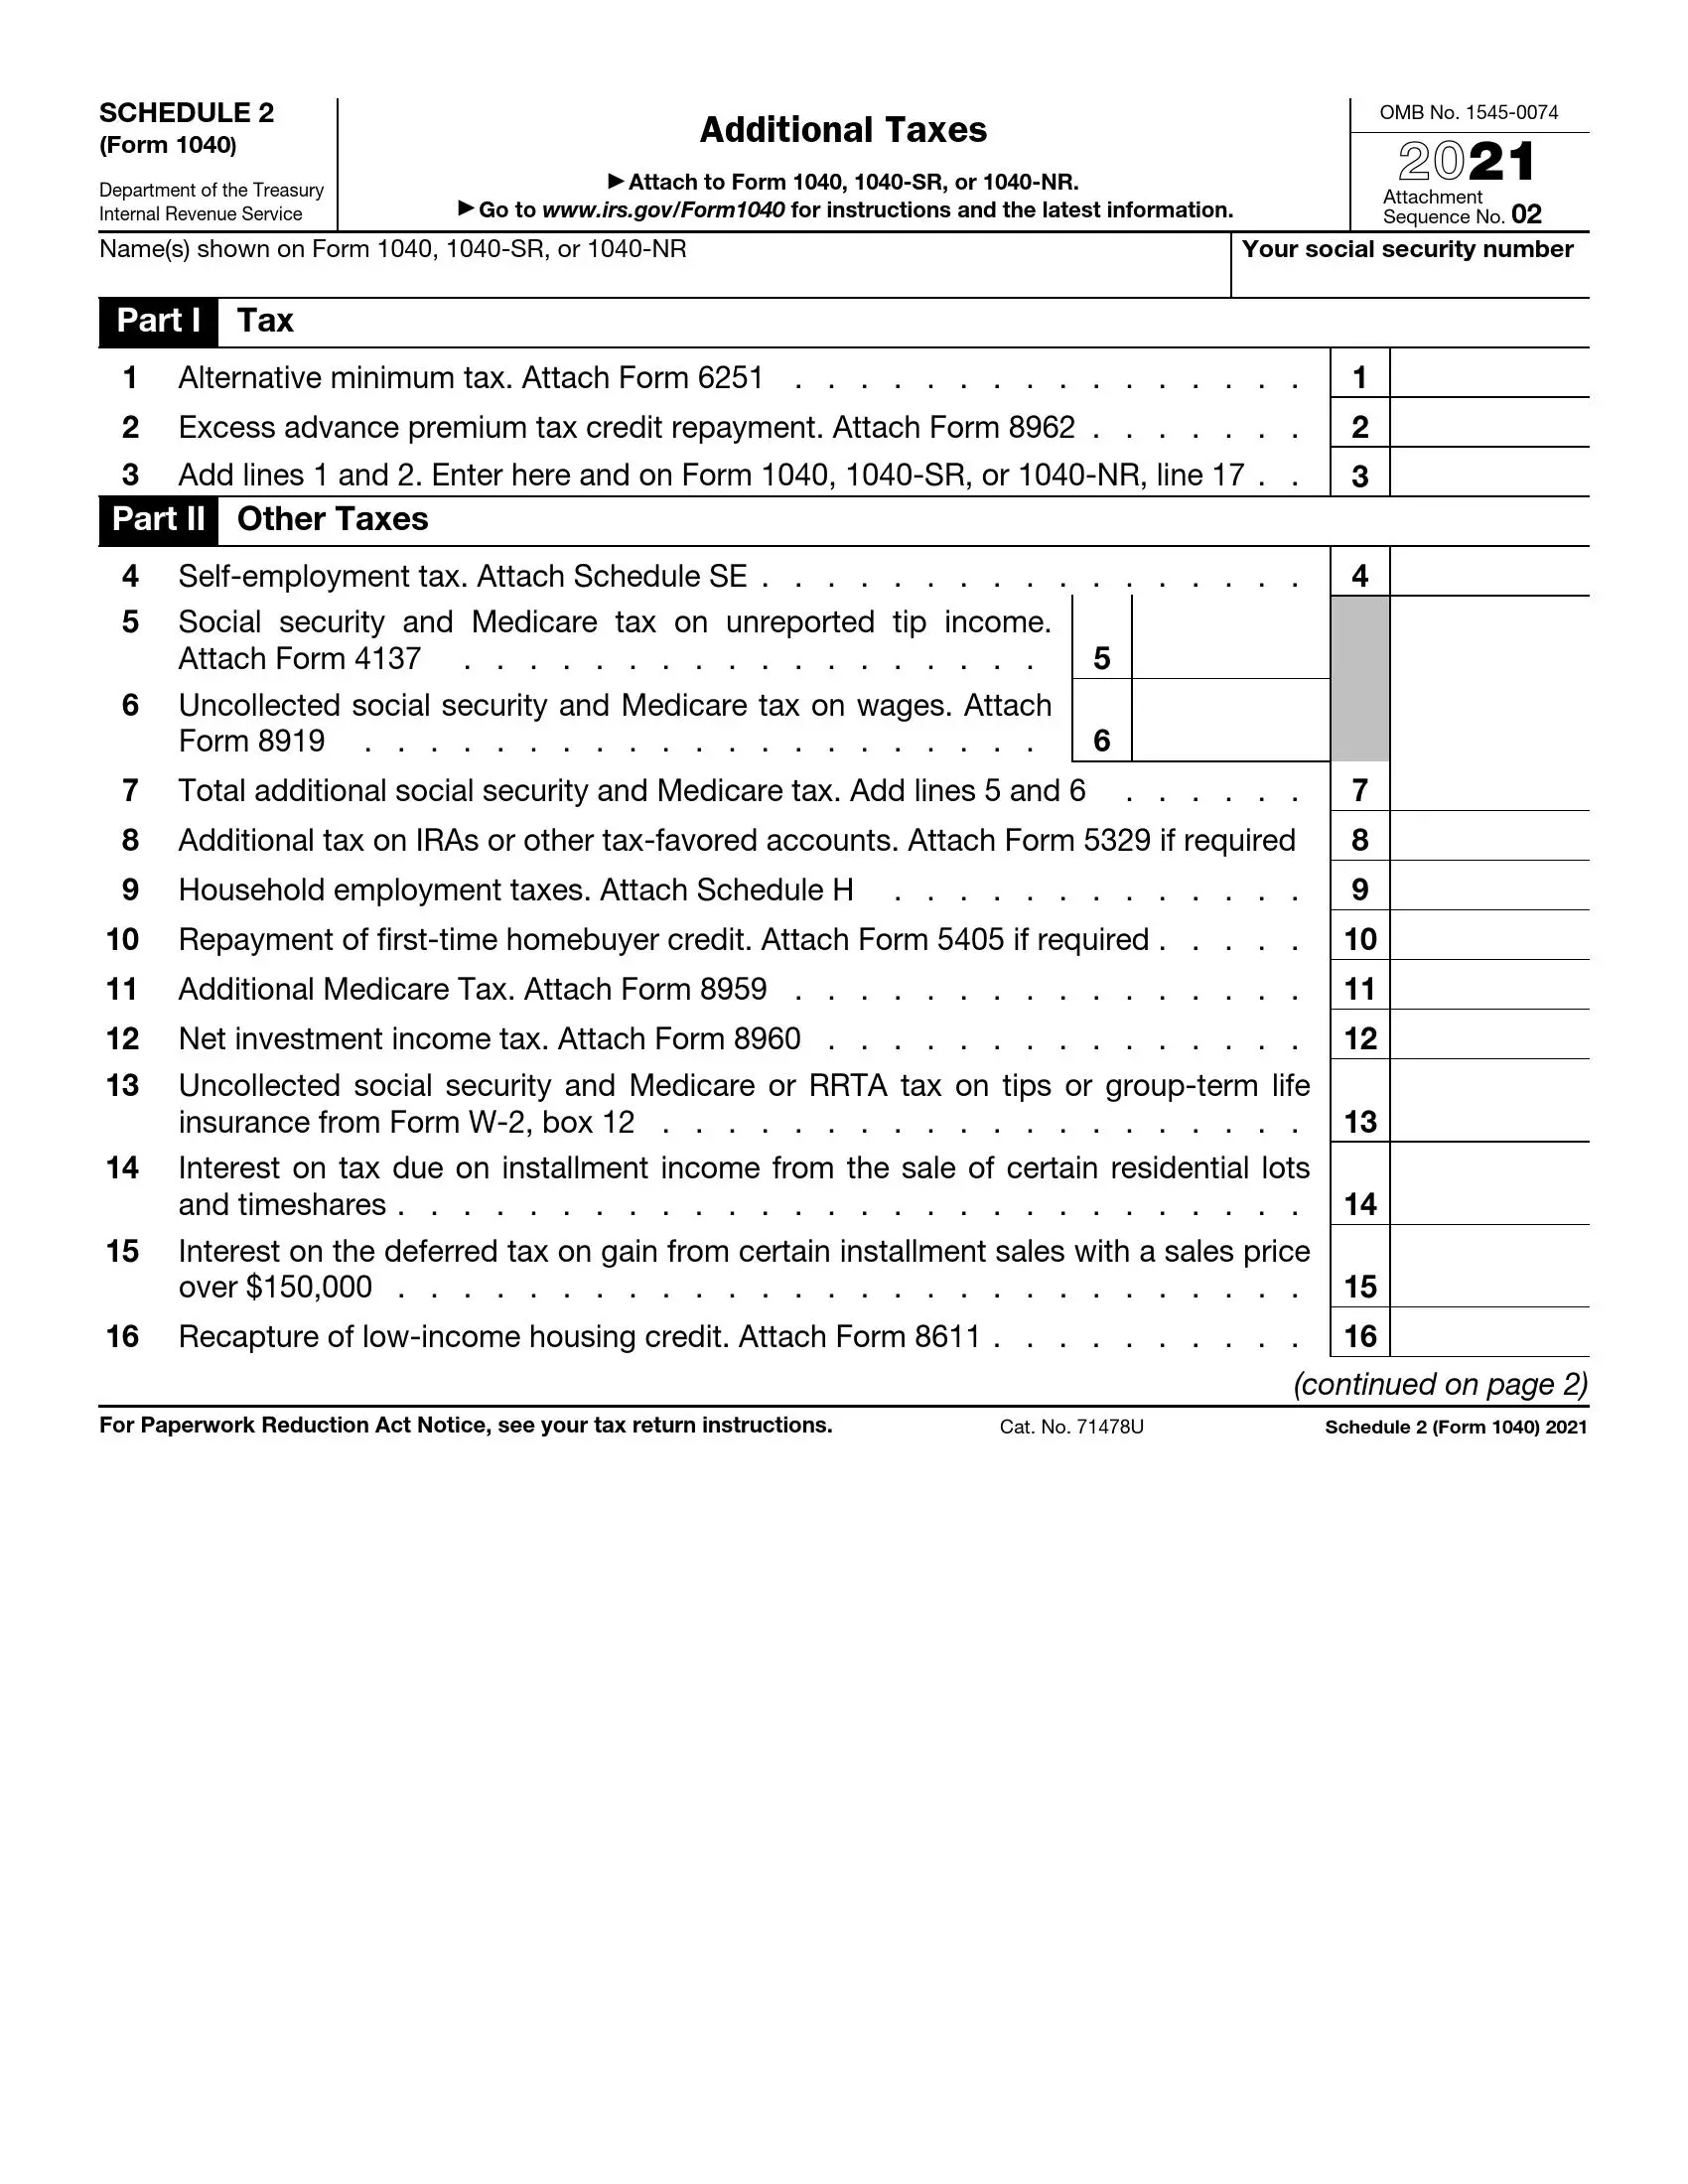 irs schedule 2 form 1040 or 1040 sr 2021 preview